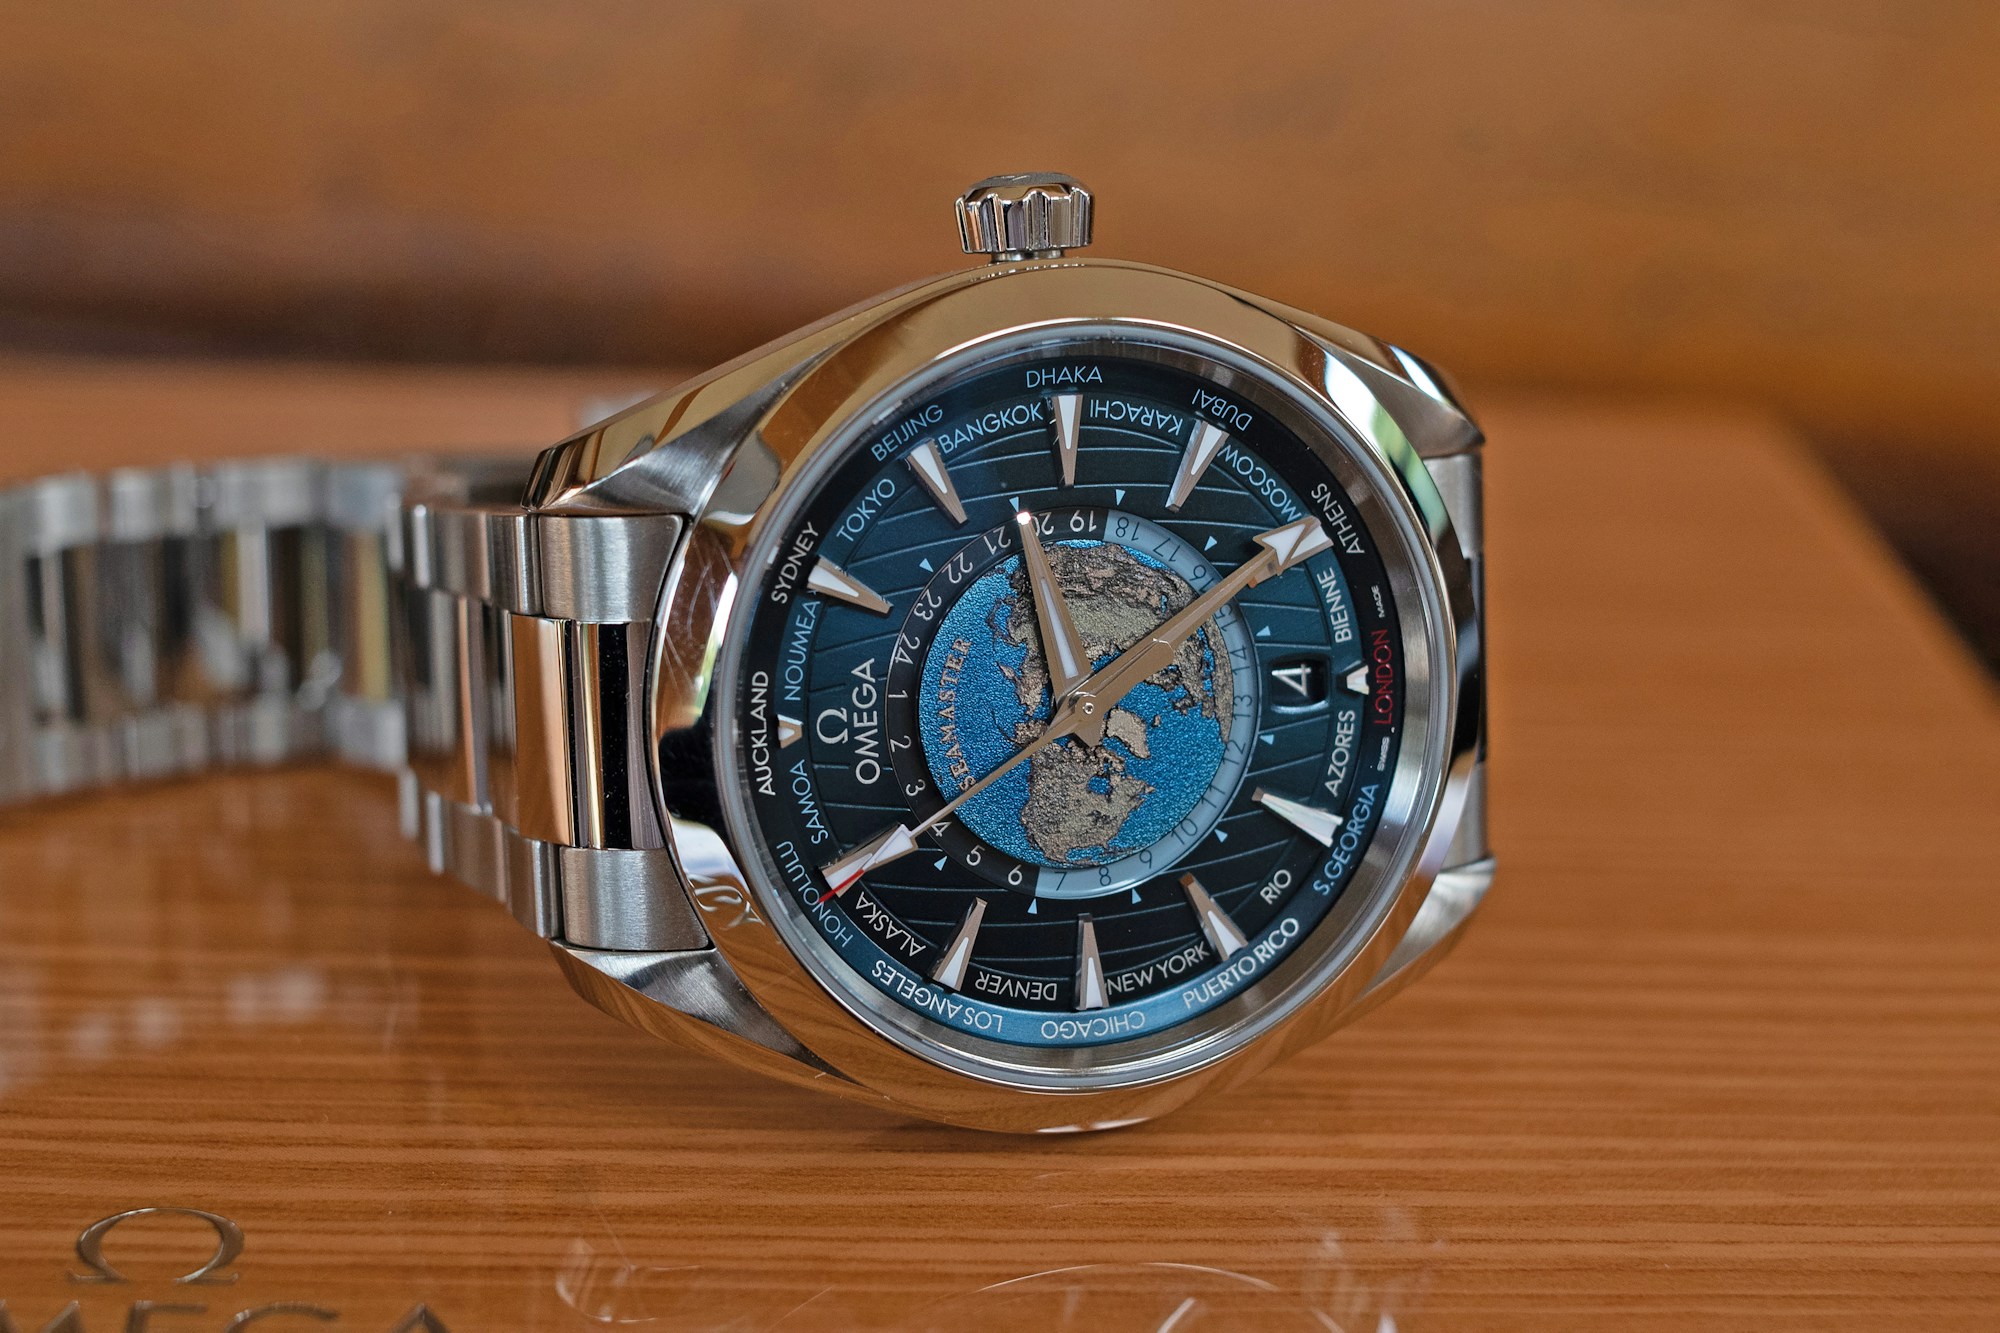 2021 OMEGA SEAMASTER AQUA TERRA WORLDTIMER for sale by auction in ...